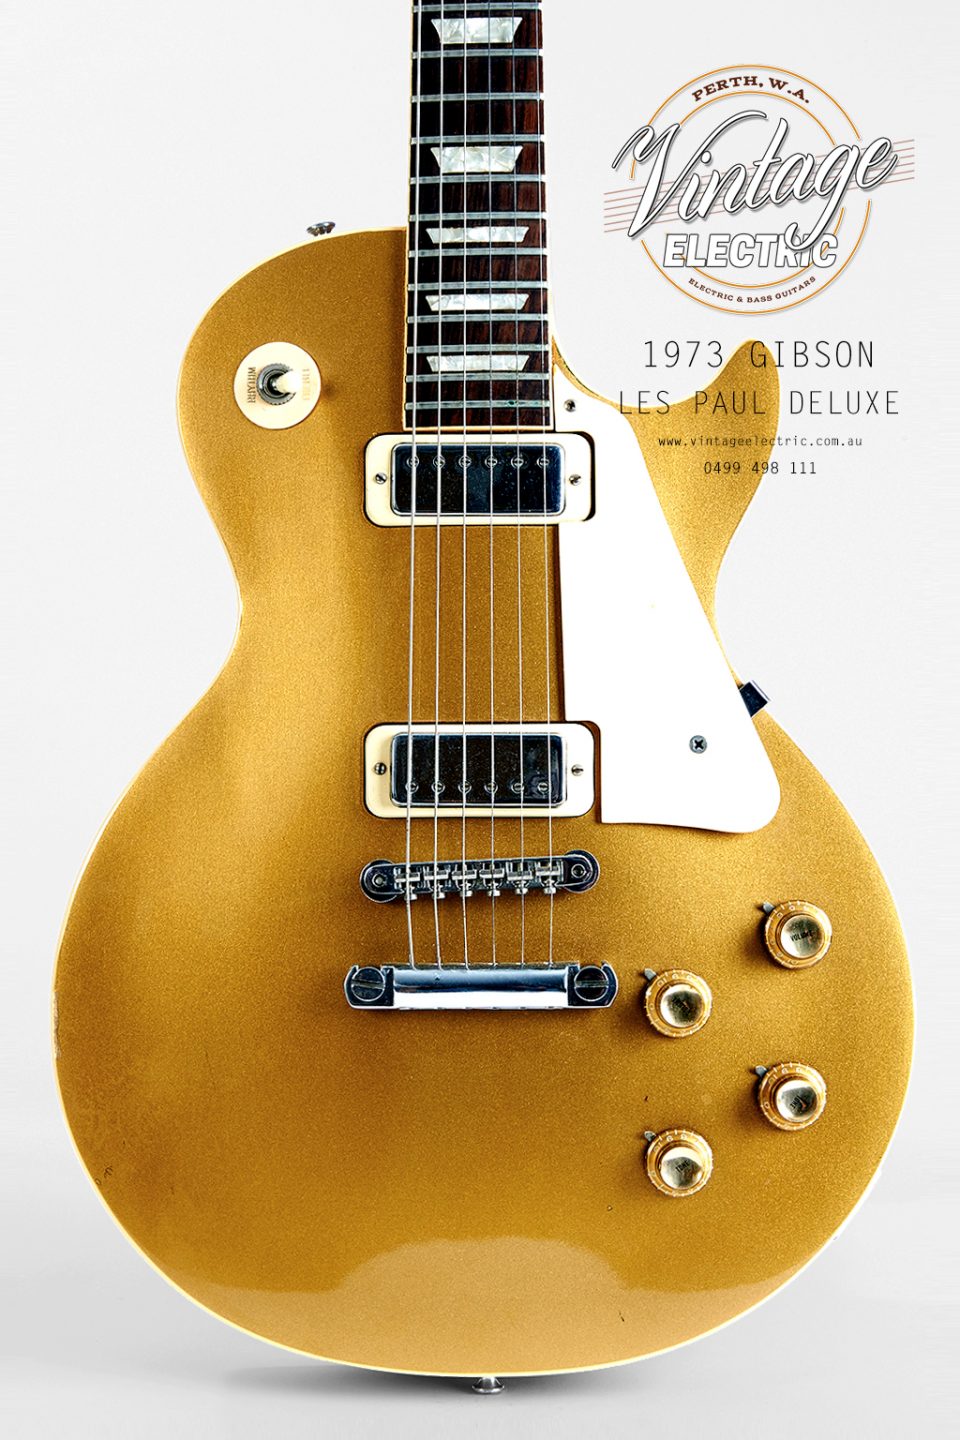 1973 Gibson Les Paul Goldtop Deluxe USA Body